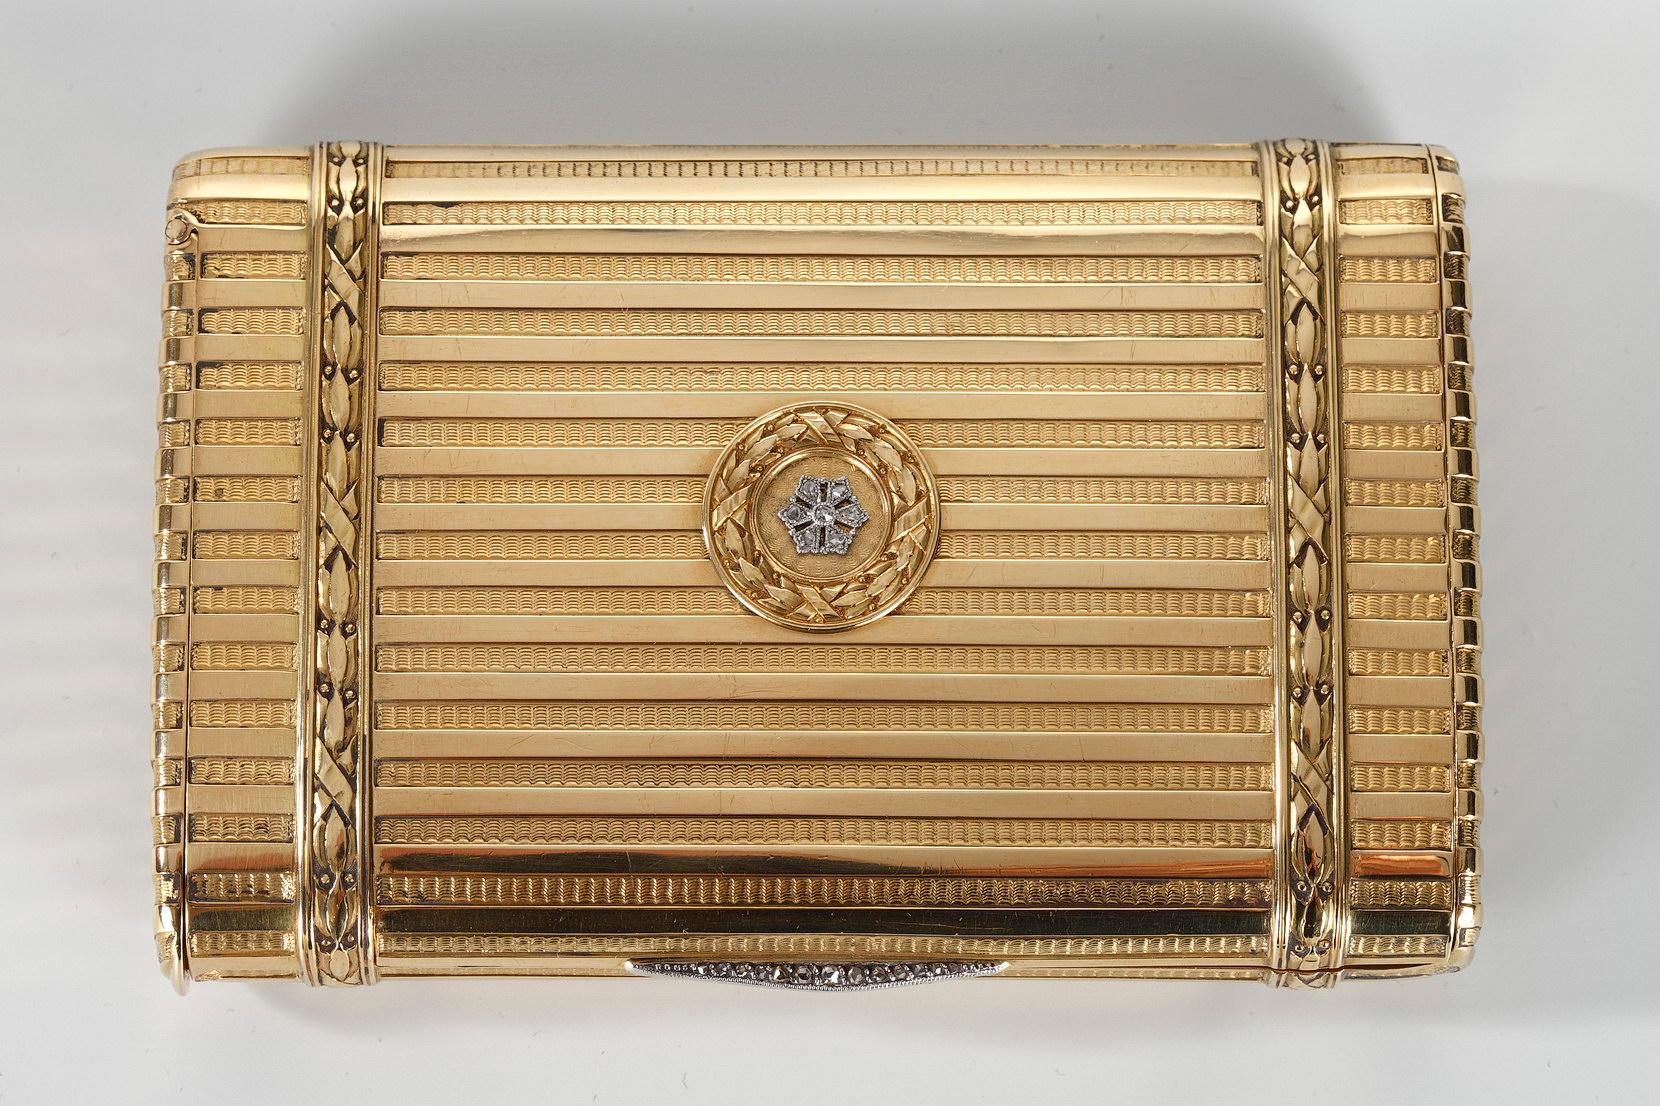 Large and large rectangular shaped gold case. The case is decorated with a fine decor of case is embellished with intricate geometric patterns of parallel stripes alternating with bands of polished gold. The hinged lid is decorated with a rosette